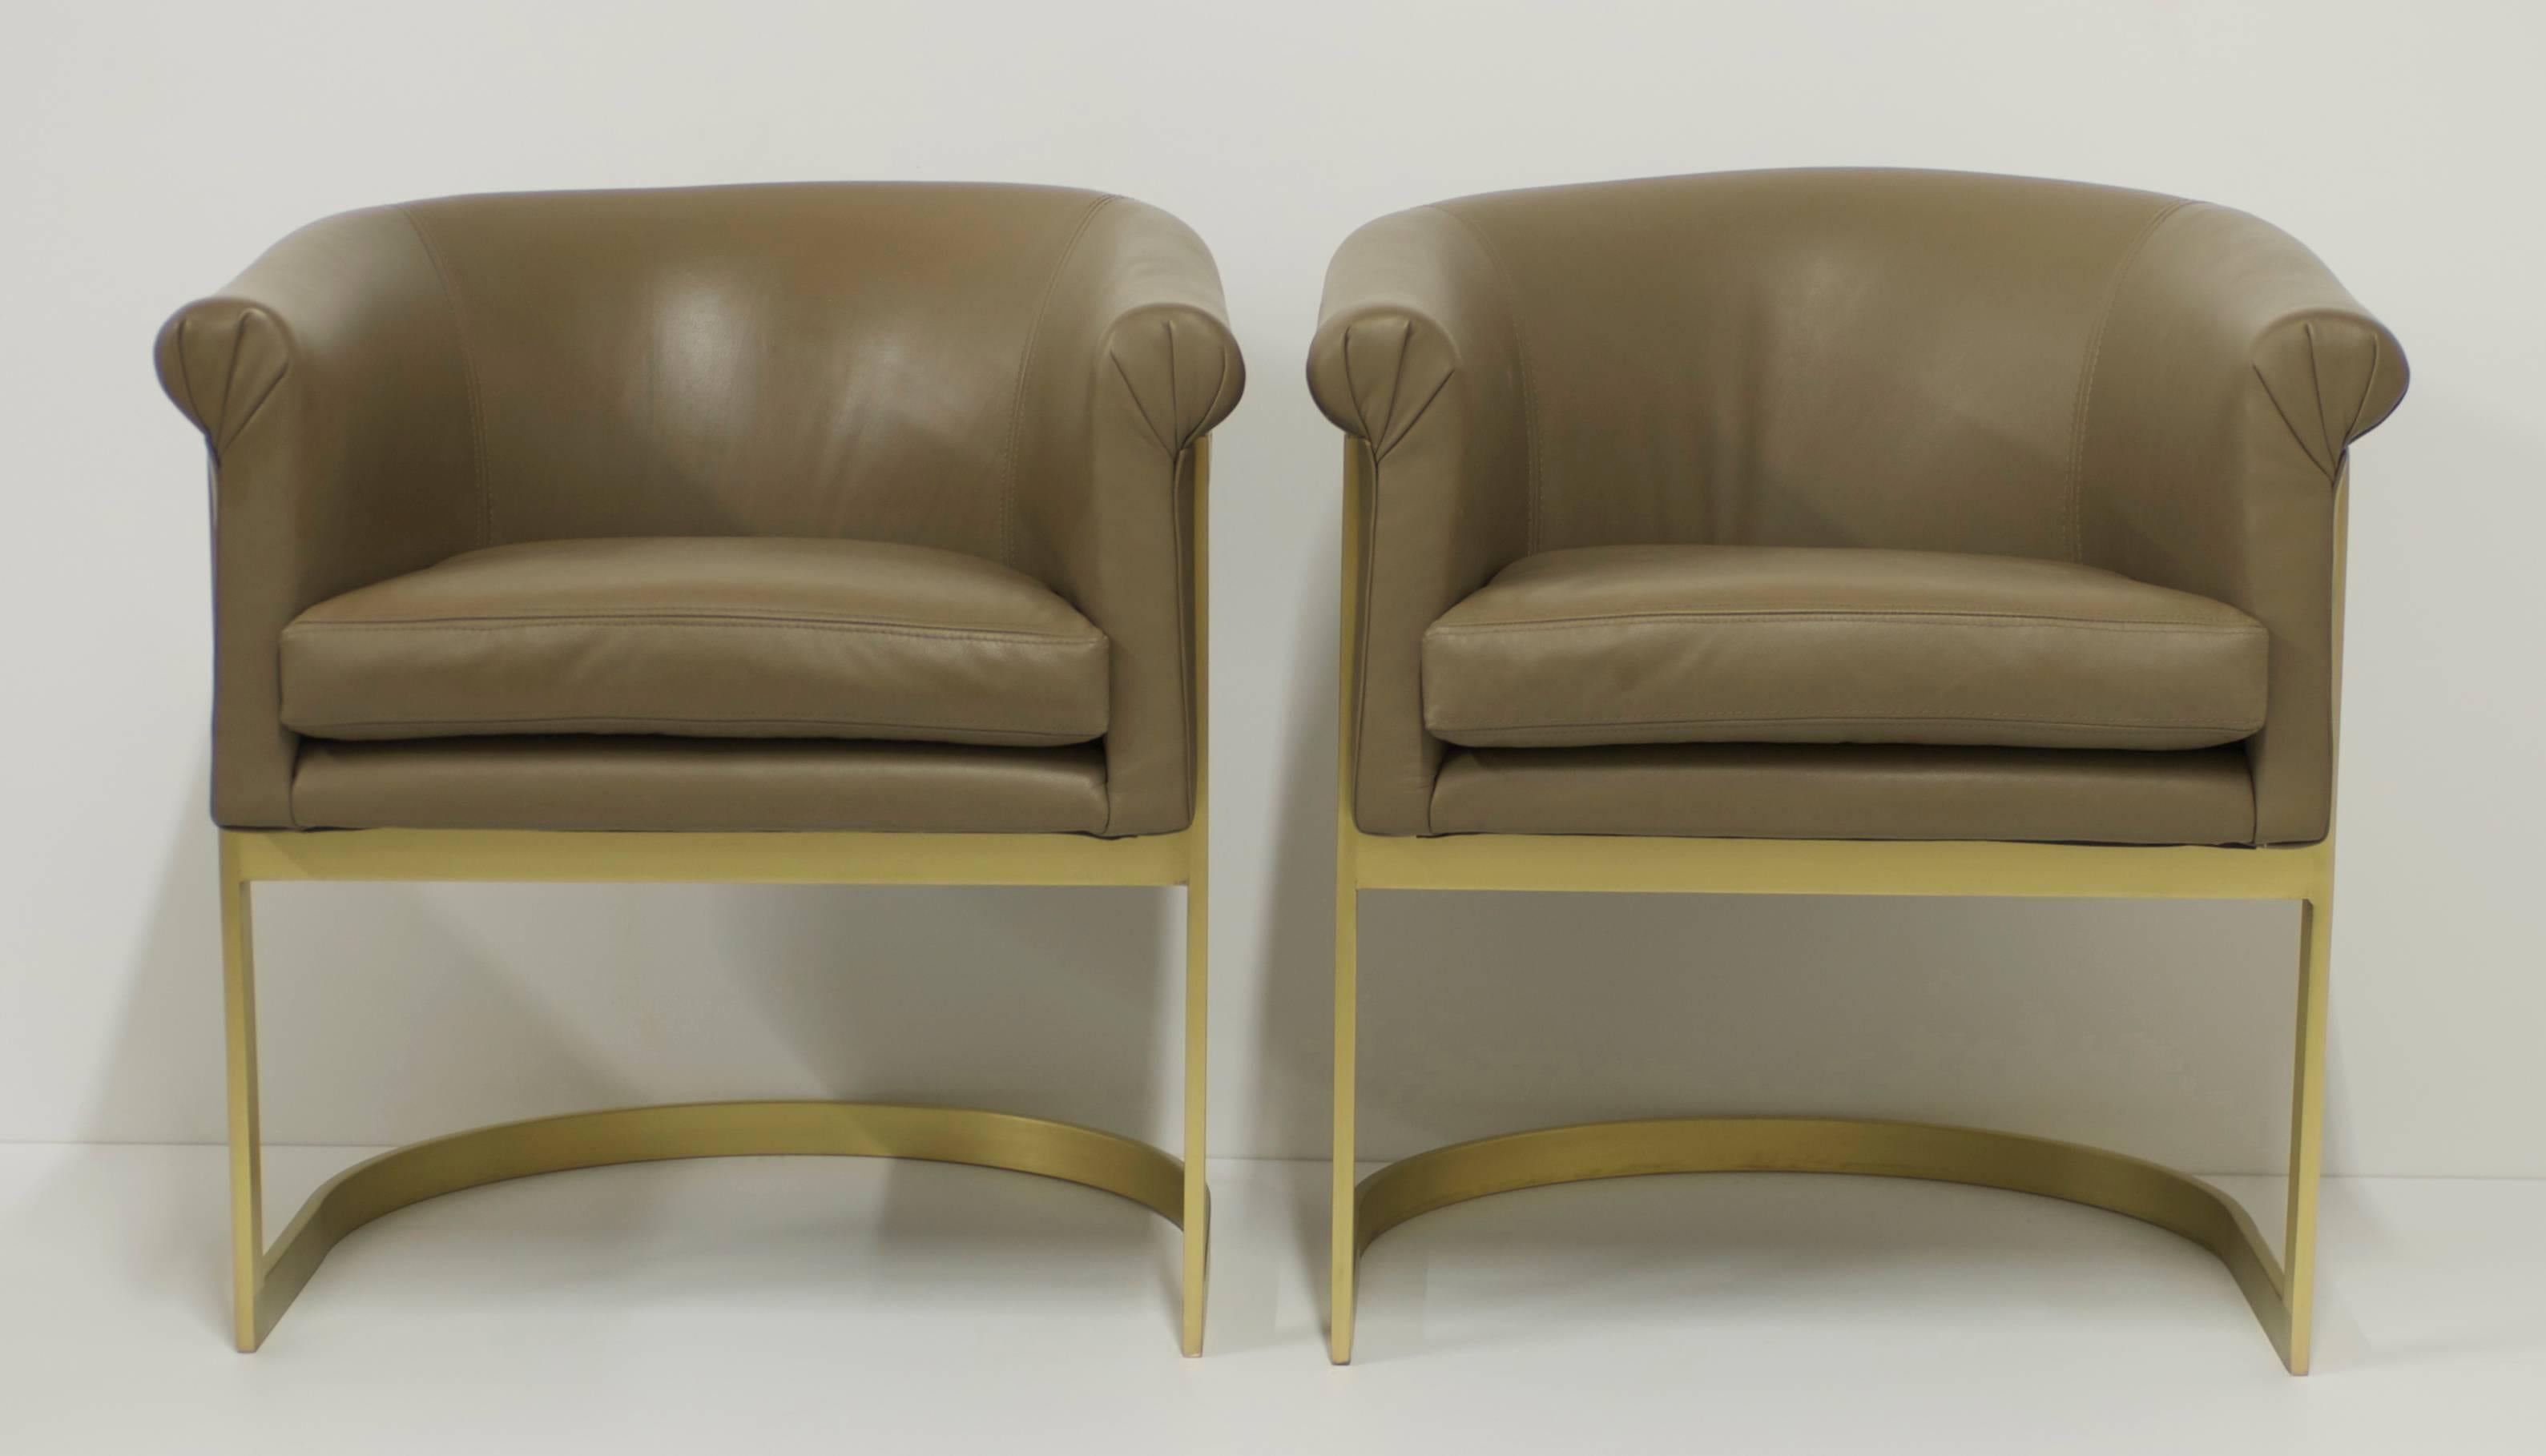 This pair of cantilevered barrel backed petite sized lounge or occasional chairs have been completely refurbished. The metal has been replated in matte brass and the upholstery has been expertly redone in a supple soft rich sage light olive color